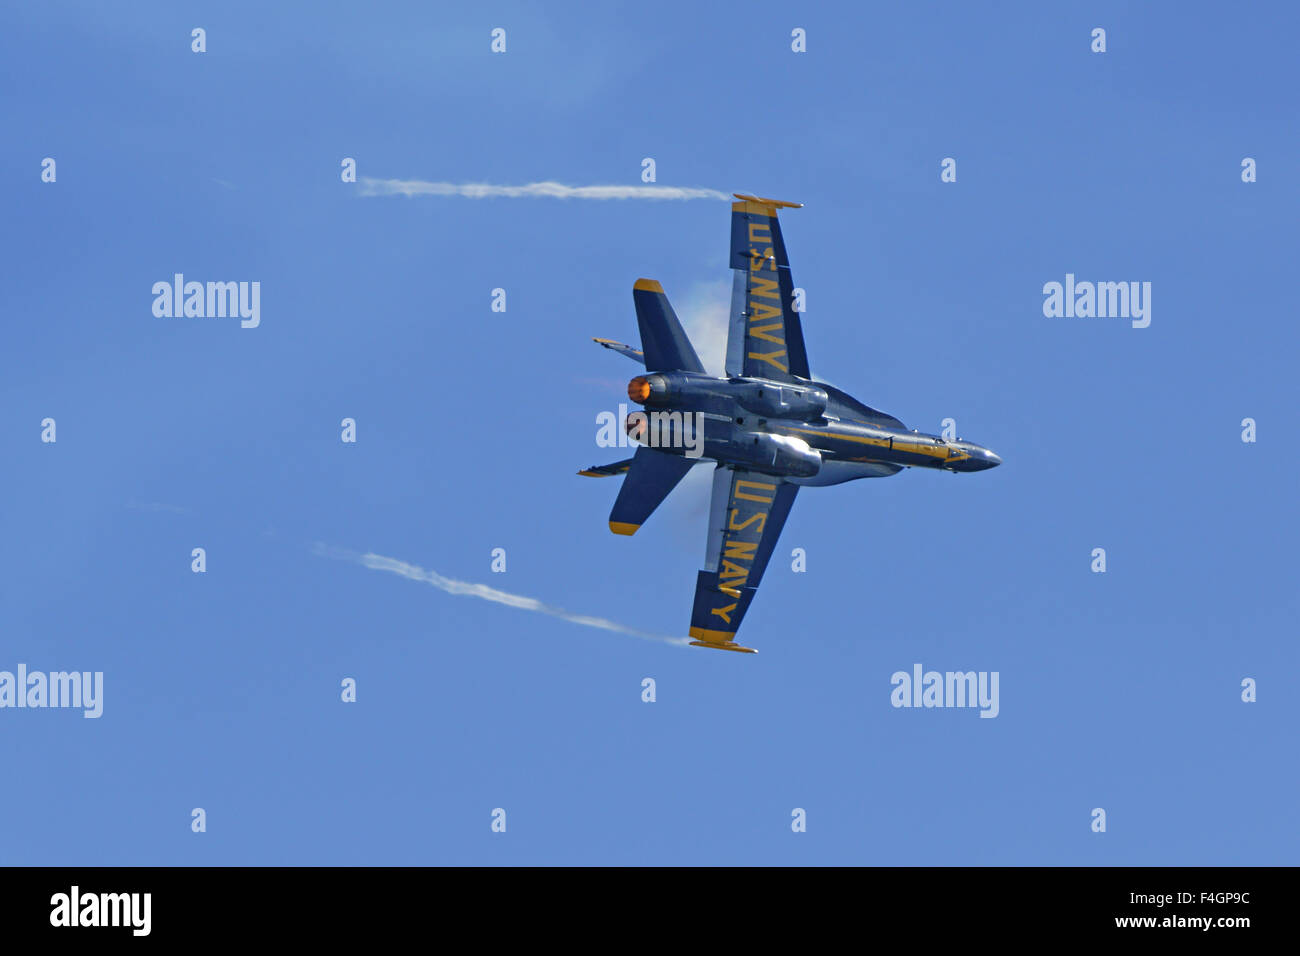 Airplane Blue Angels Navy F-18 Hornet jet fighter flying at 2015 Miramar Air Show in San Diego, California Stock Photo